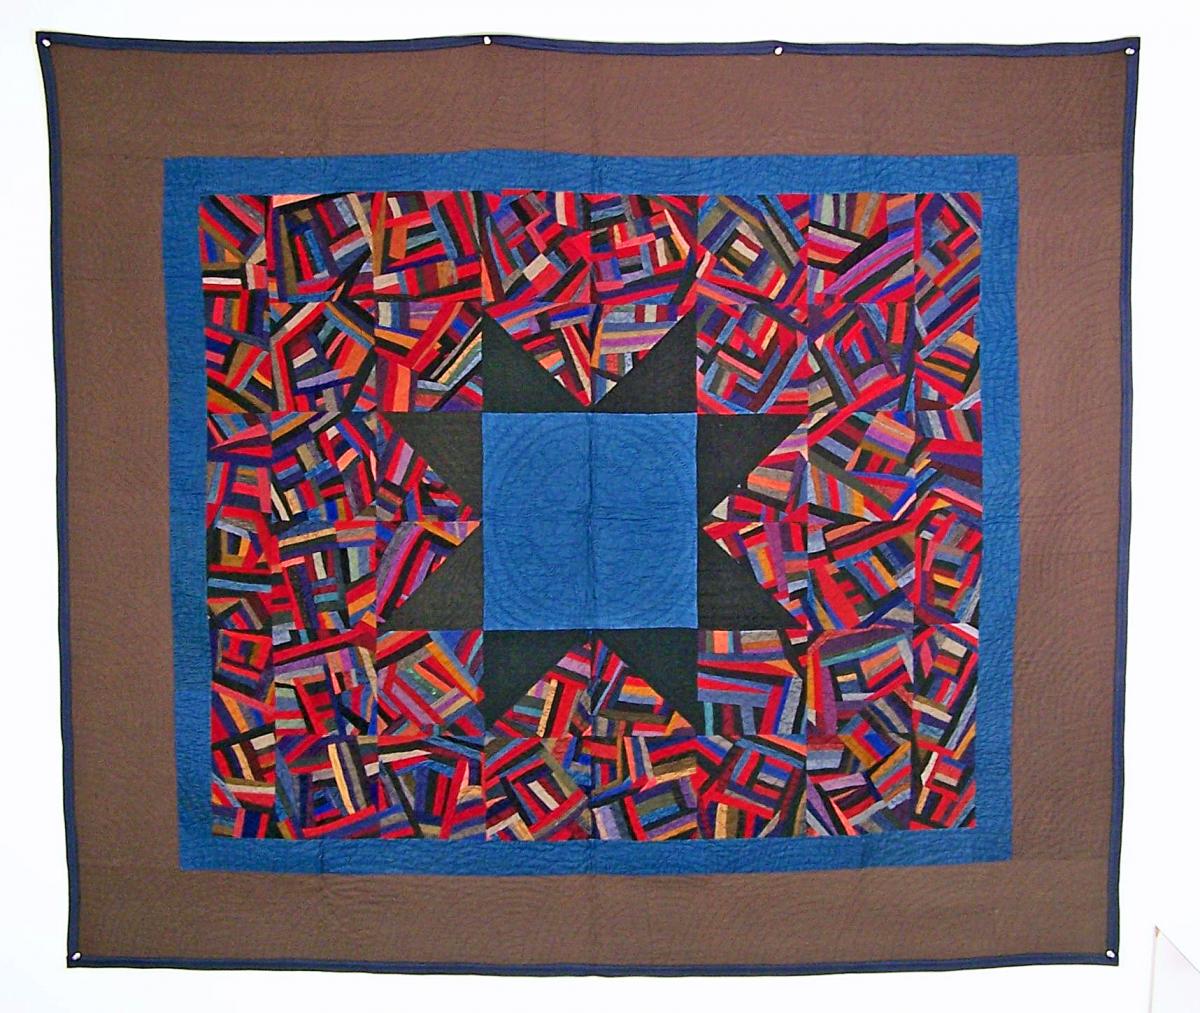 Crazy Star Quilt in brown, red, and blue